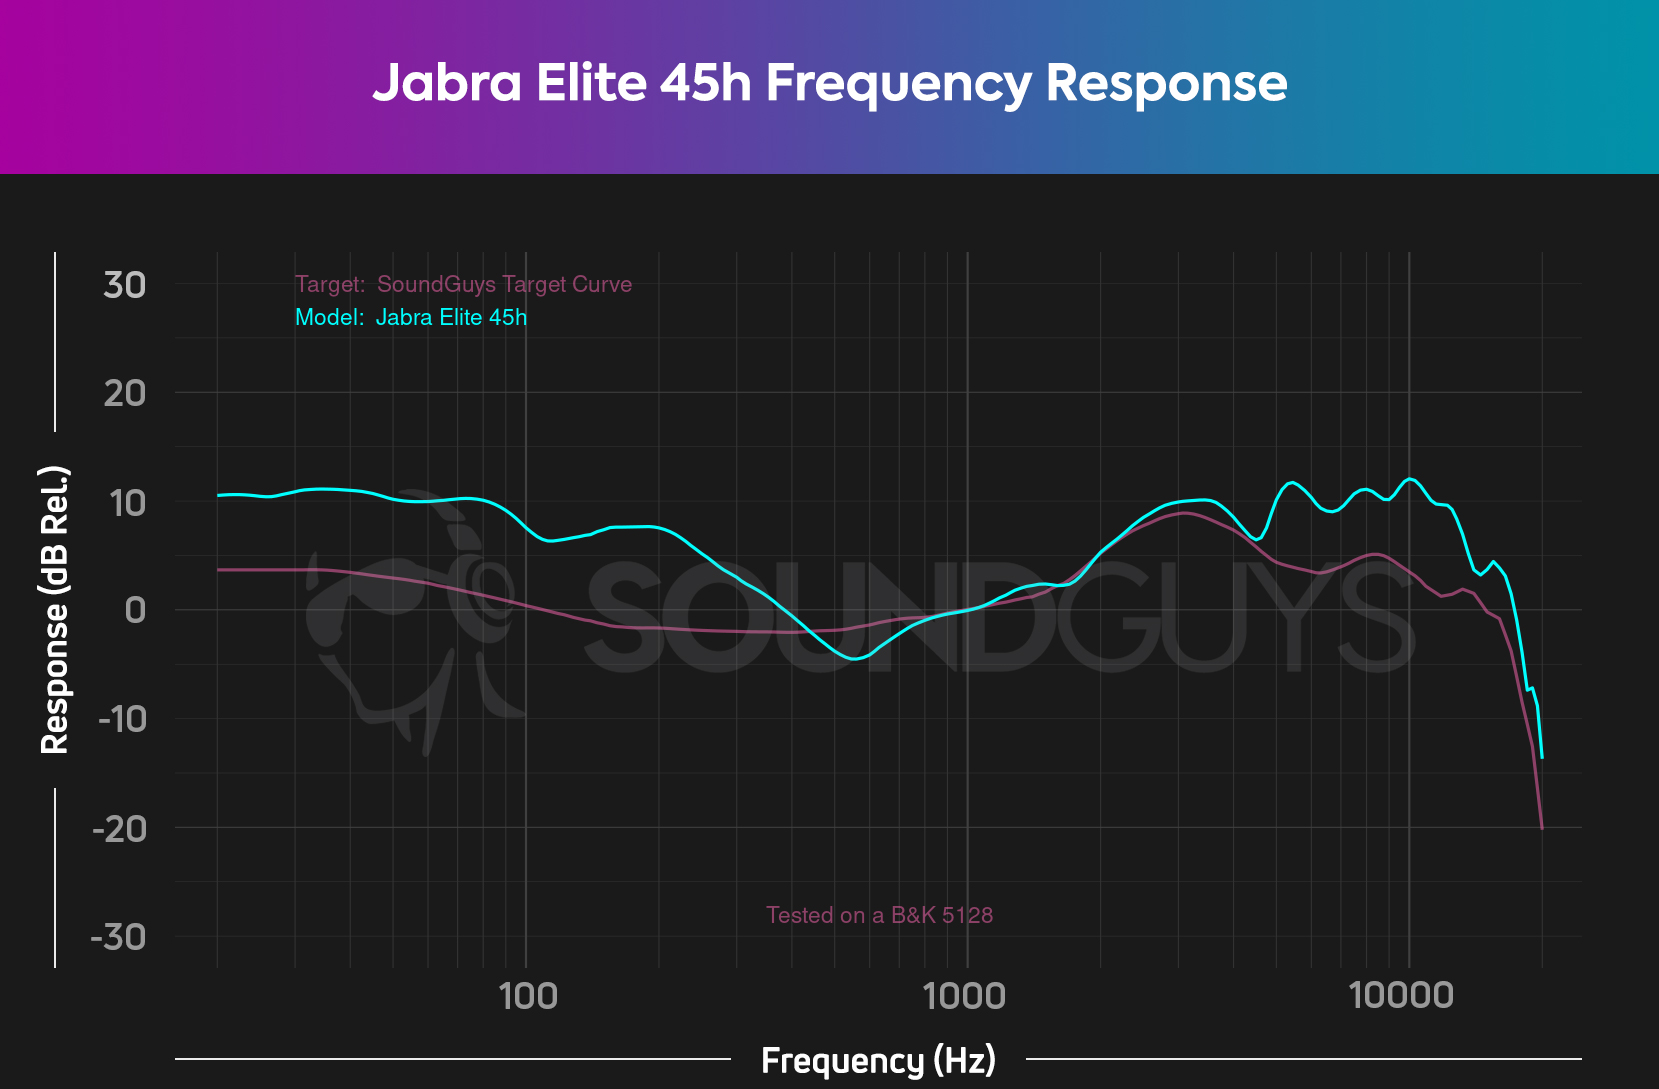 A chart depicts the Jabra Elite 45h frequency response relative to the SoundGuys Target Curve, revealing the 45h's amplified bass response.